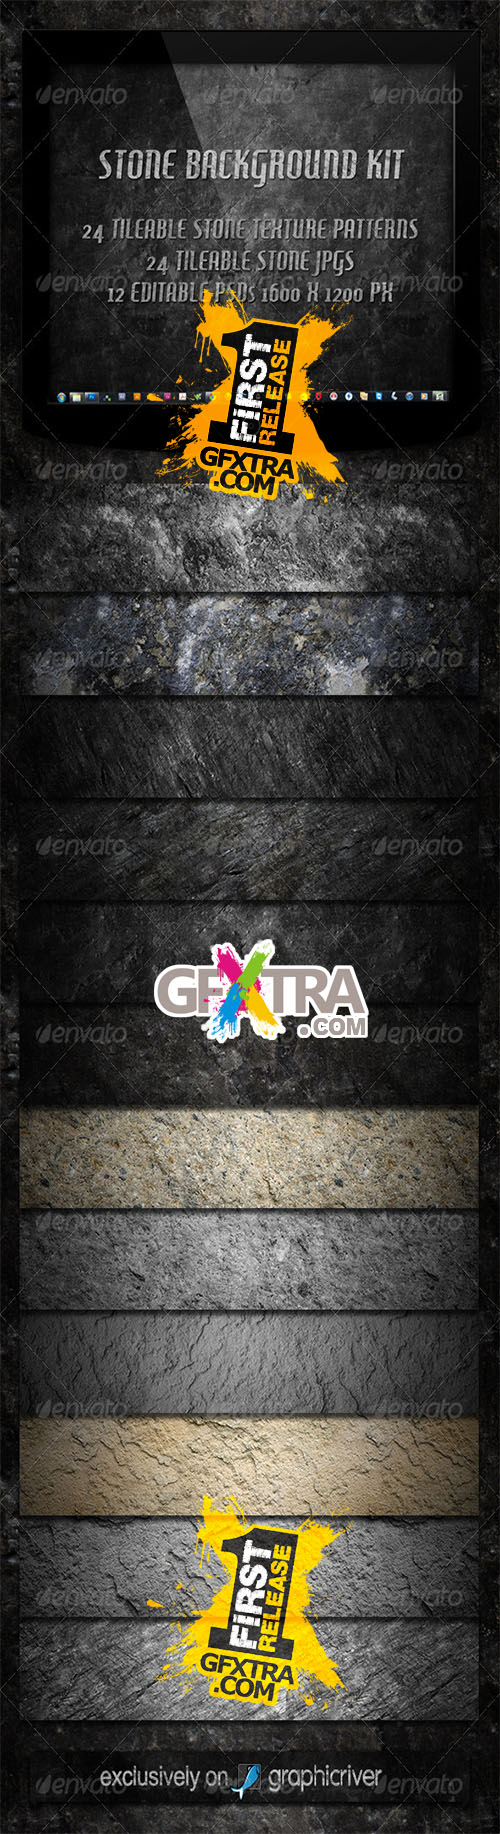 GraphicRiver - 12 Tileable Stone Textures Background Kit